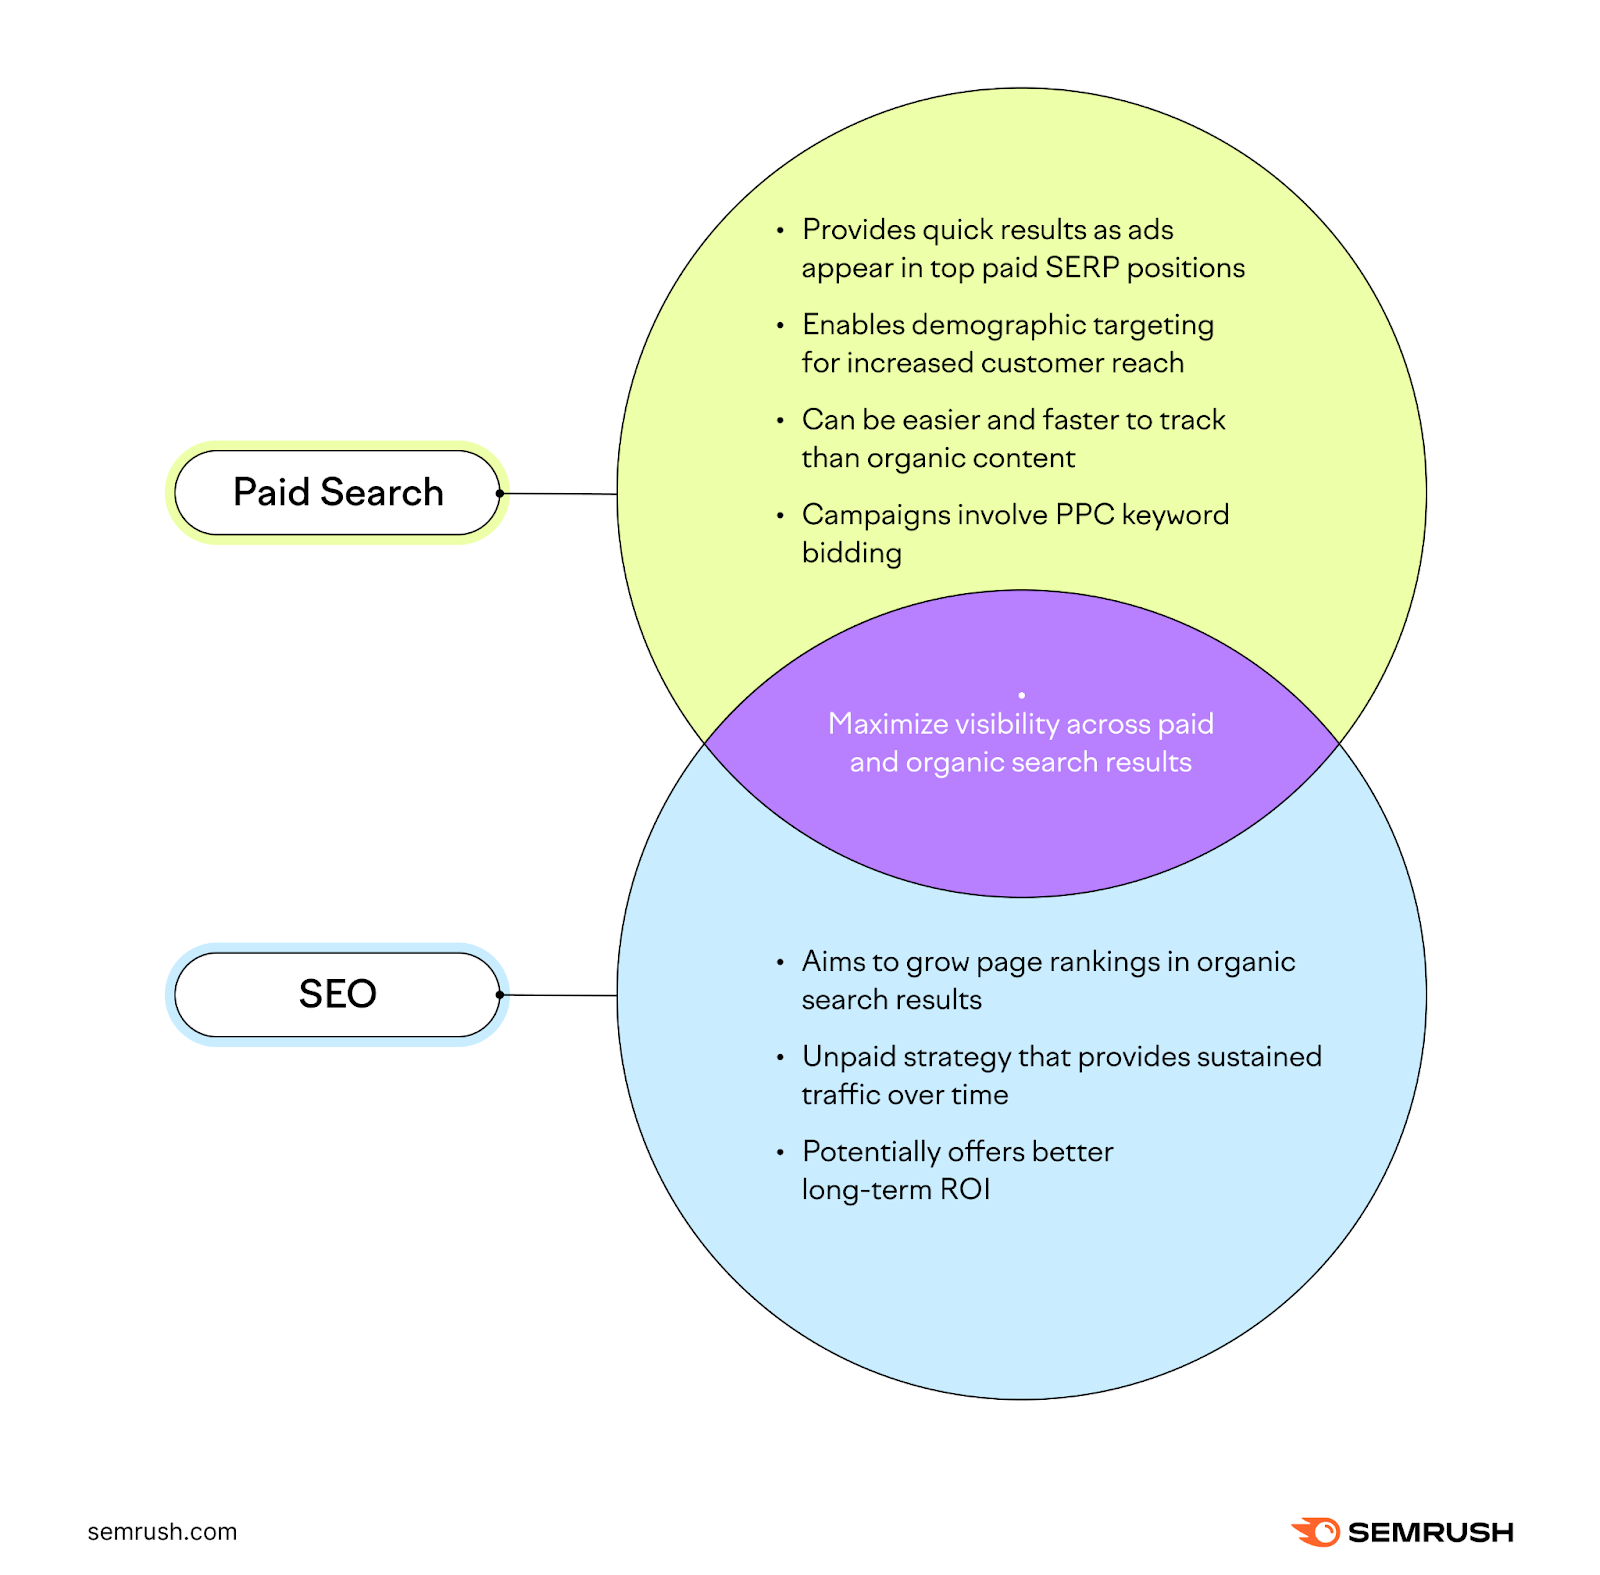 Combining paid search and SEO can maximize visibility across paid and organic search results